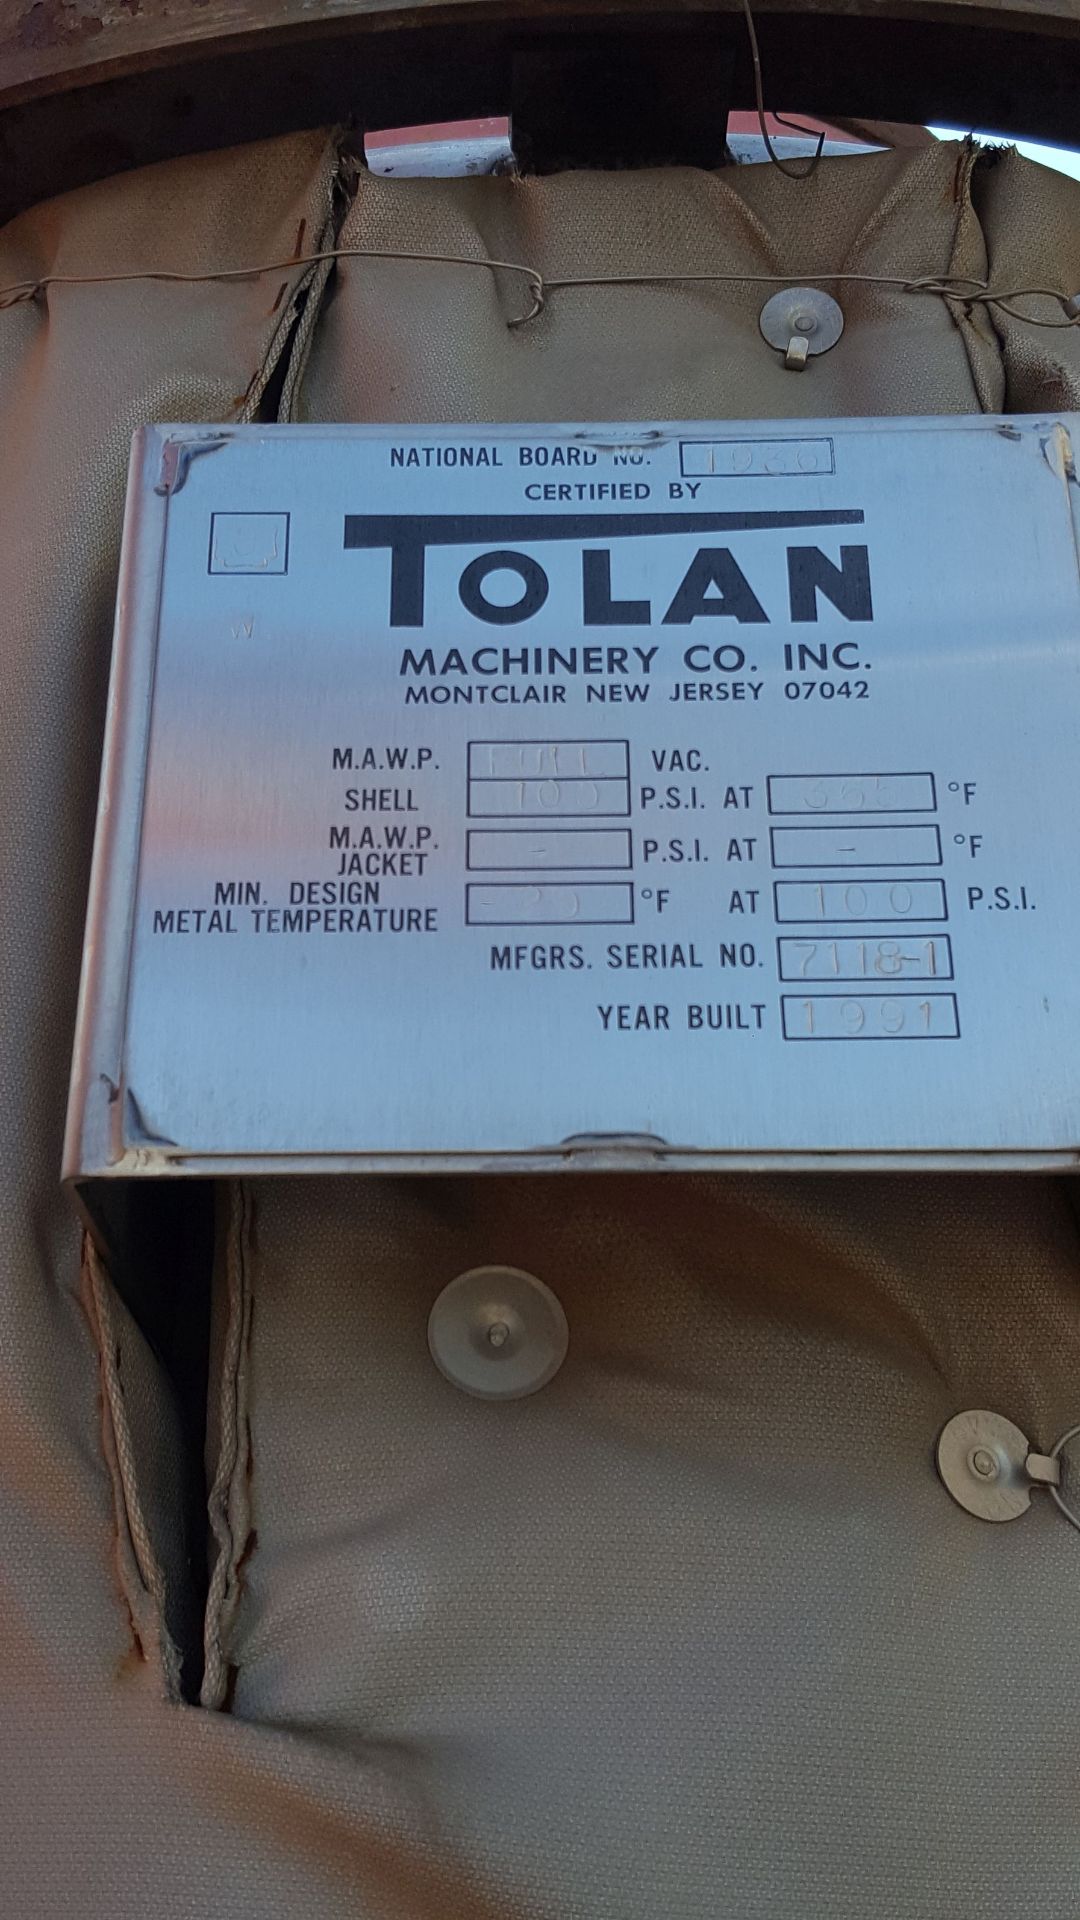 Tolan Machinery Stainless Steel Vessel 65" x 36" National Board 1936 - Image 6 of 7